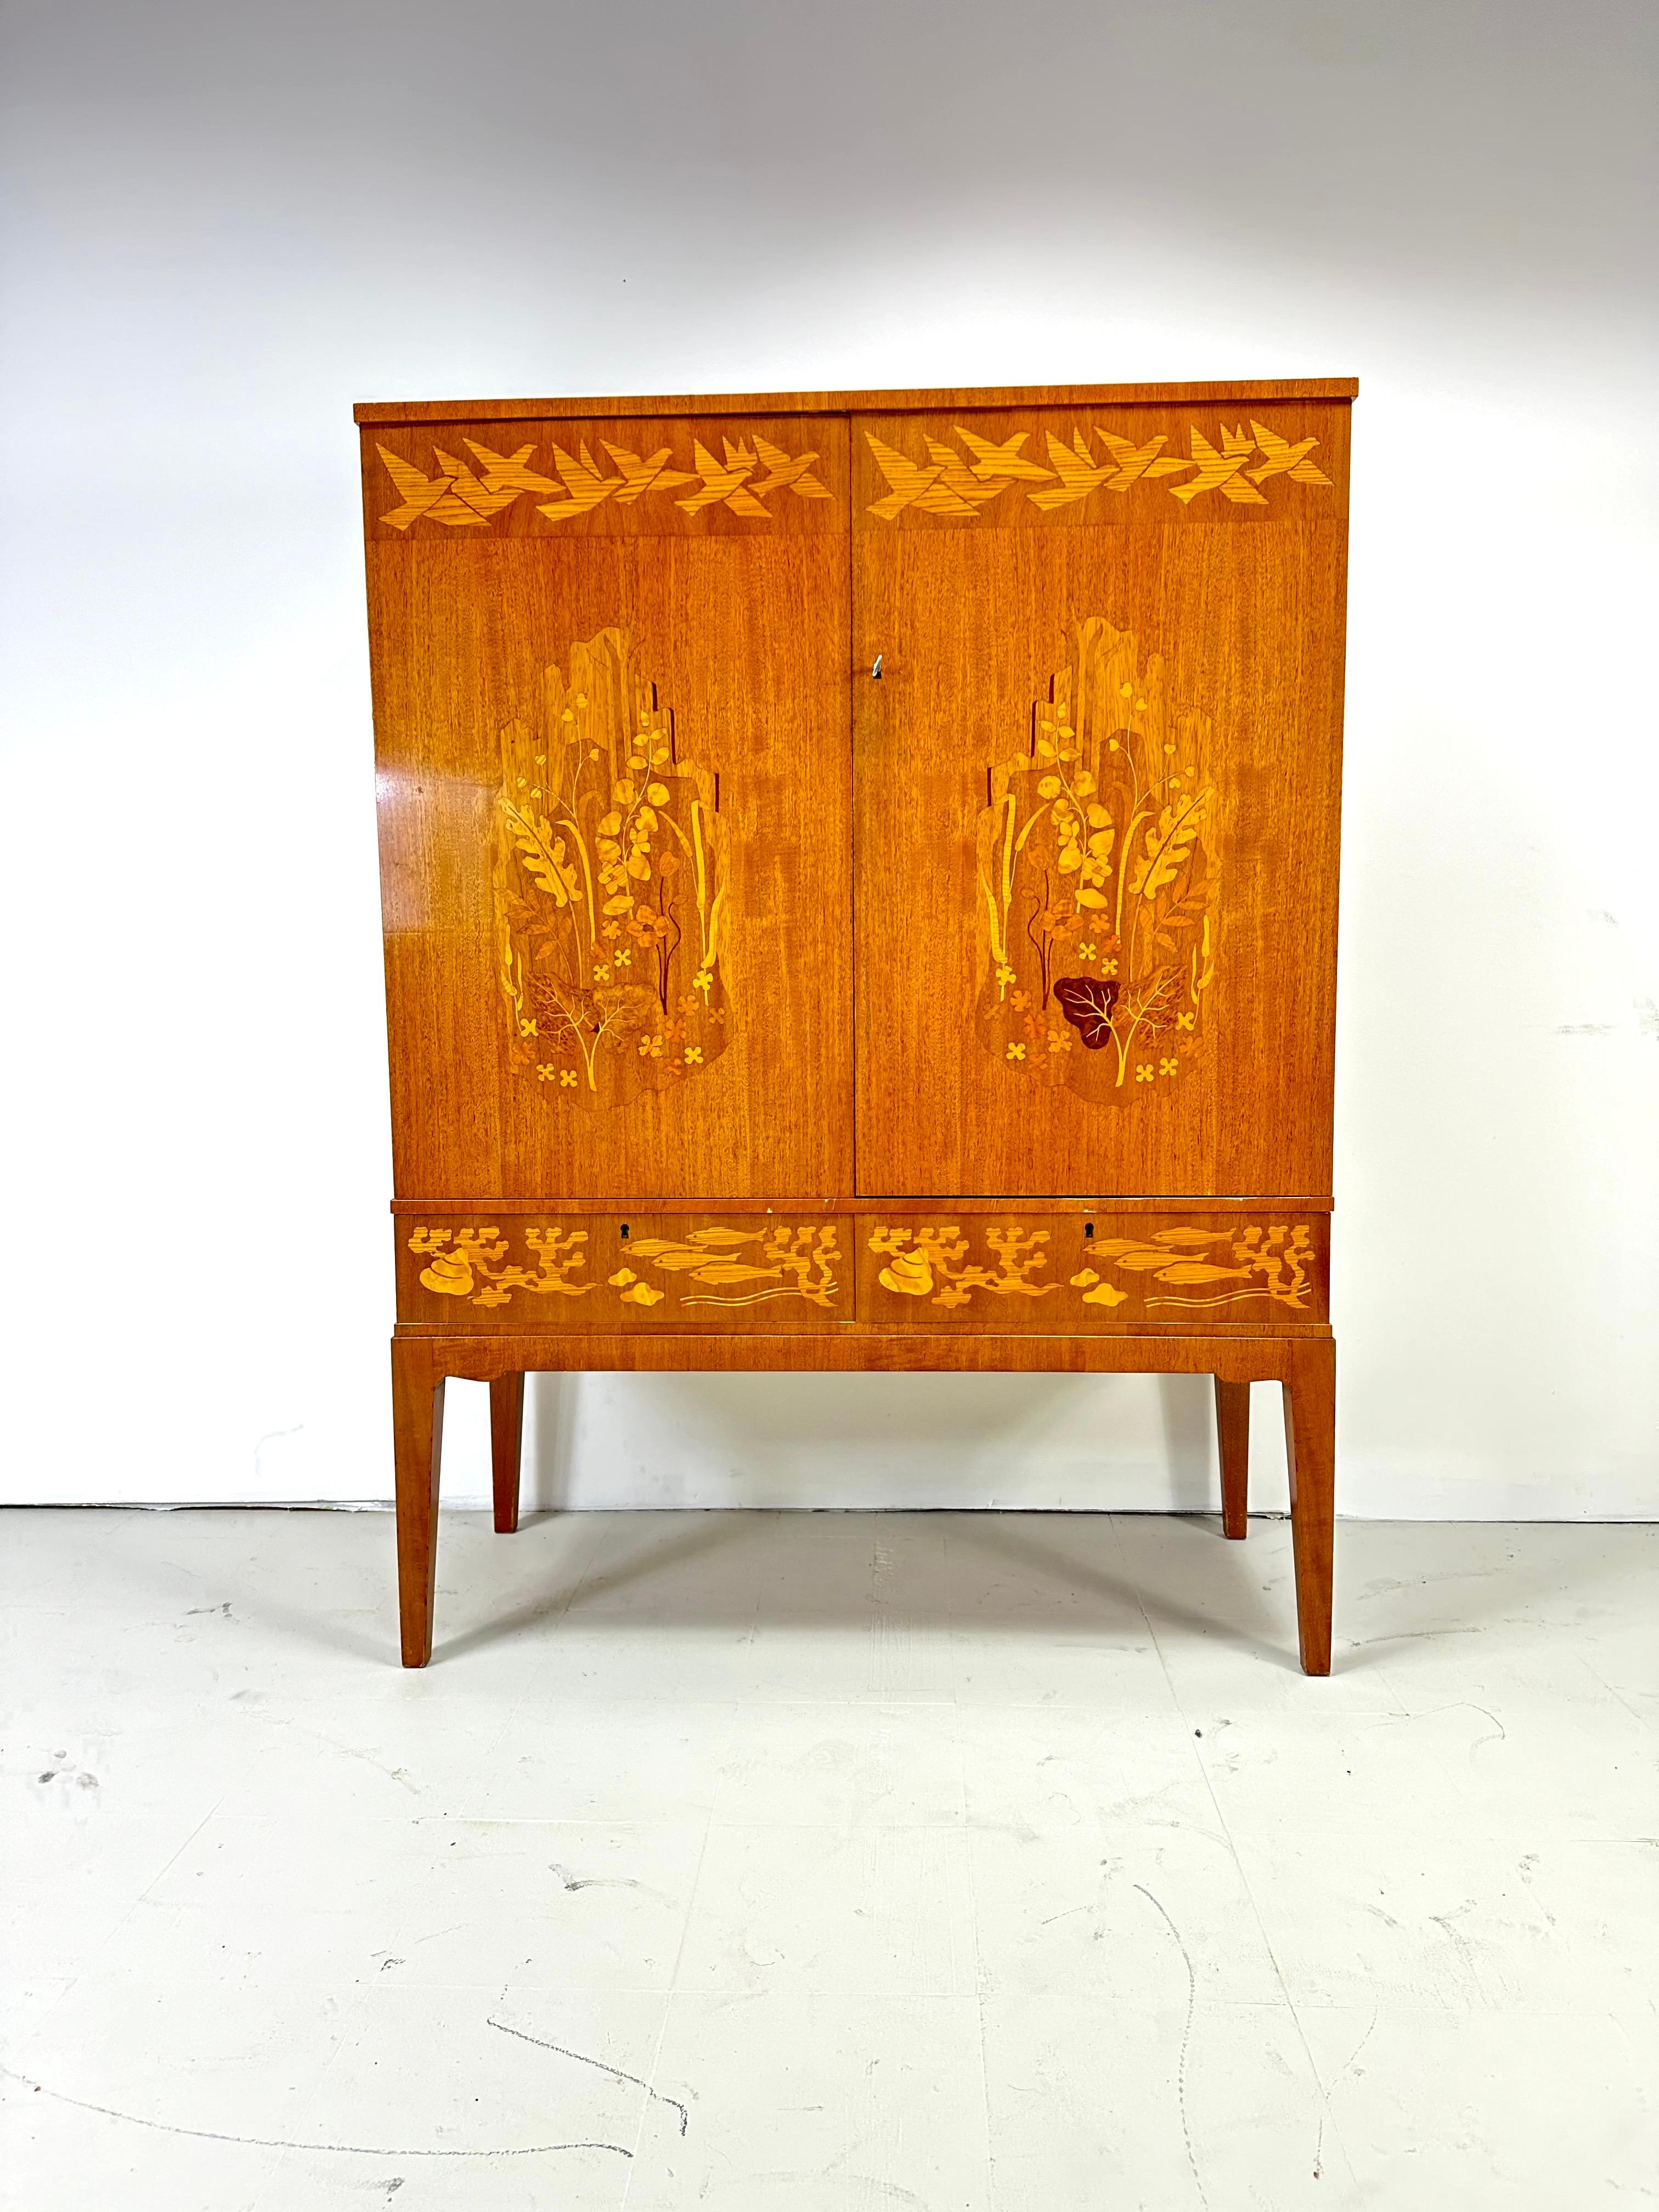 1940’s Swedish Cabinet designed by Erik Mattson. Beautiful intarsia woodworking creating a scene of fish, plants, and birds. Doors conceal interior shelves and drawers. 2 additional front drawers. l